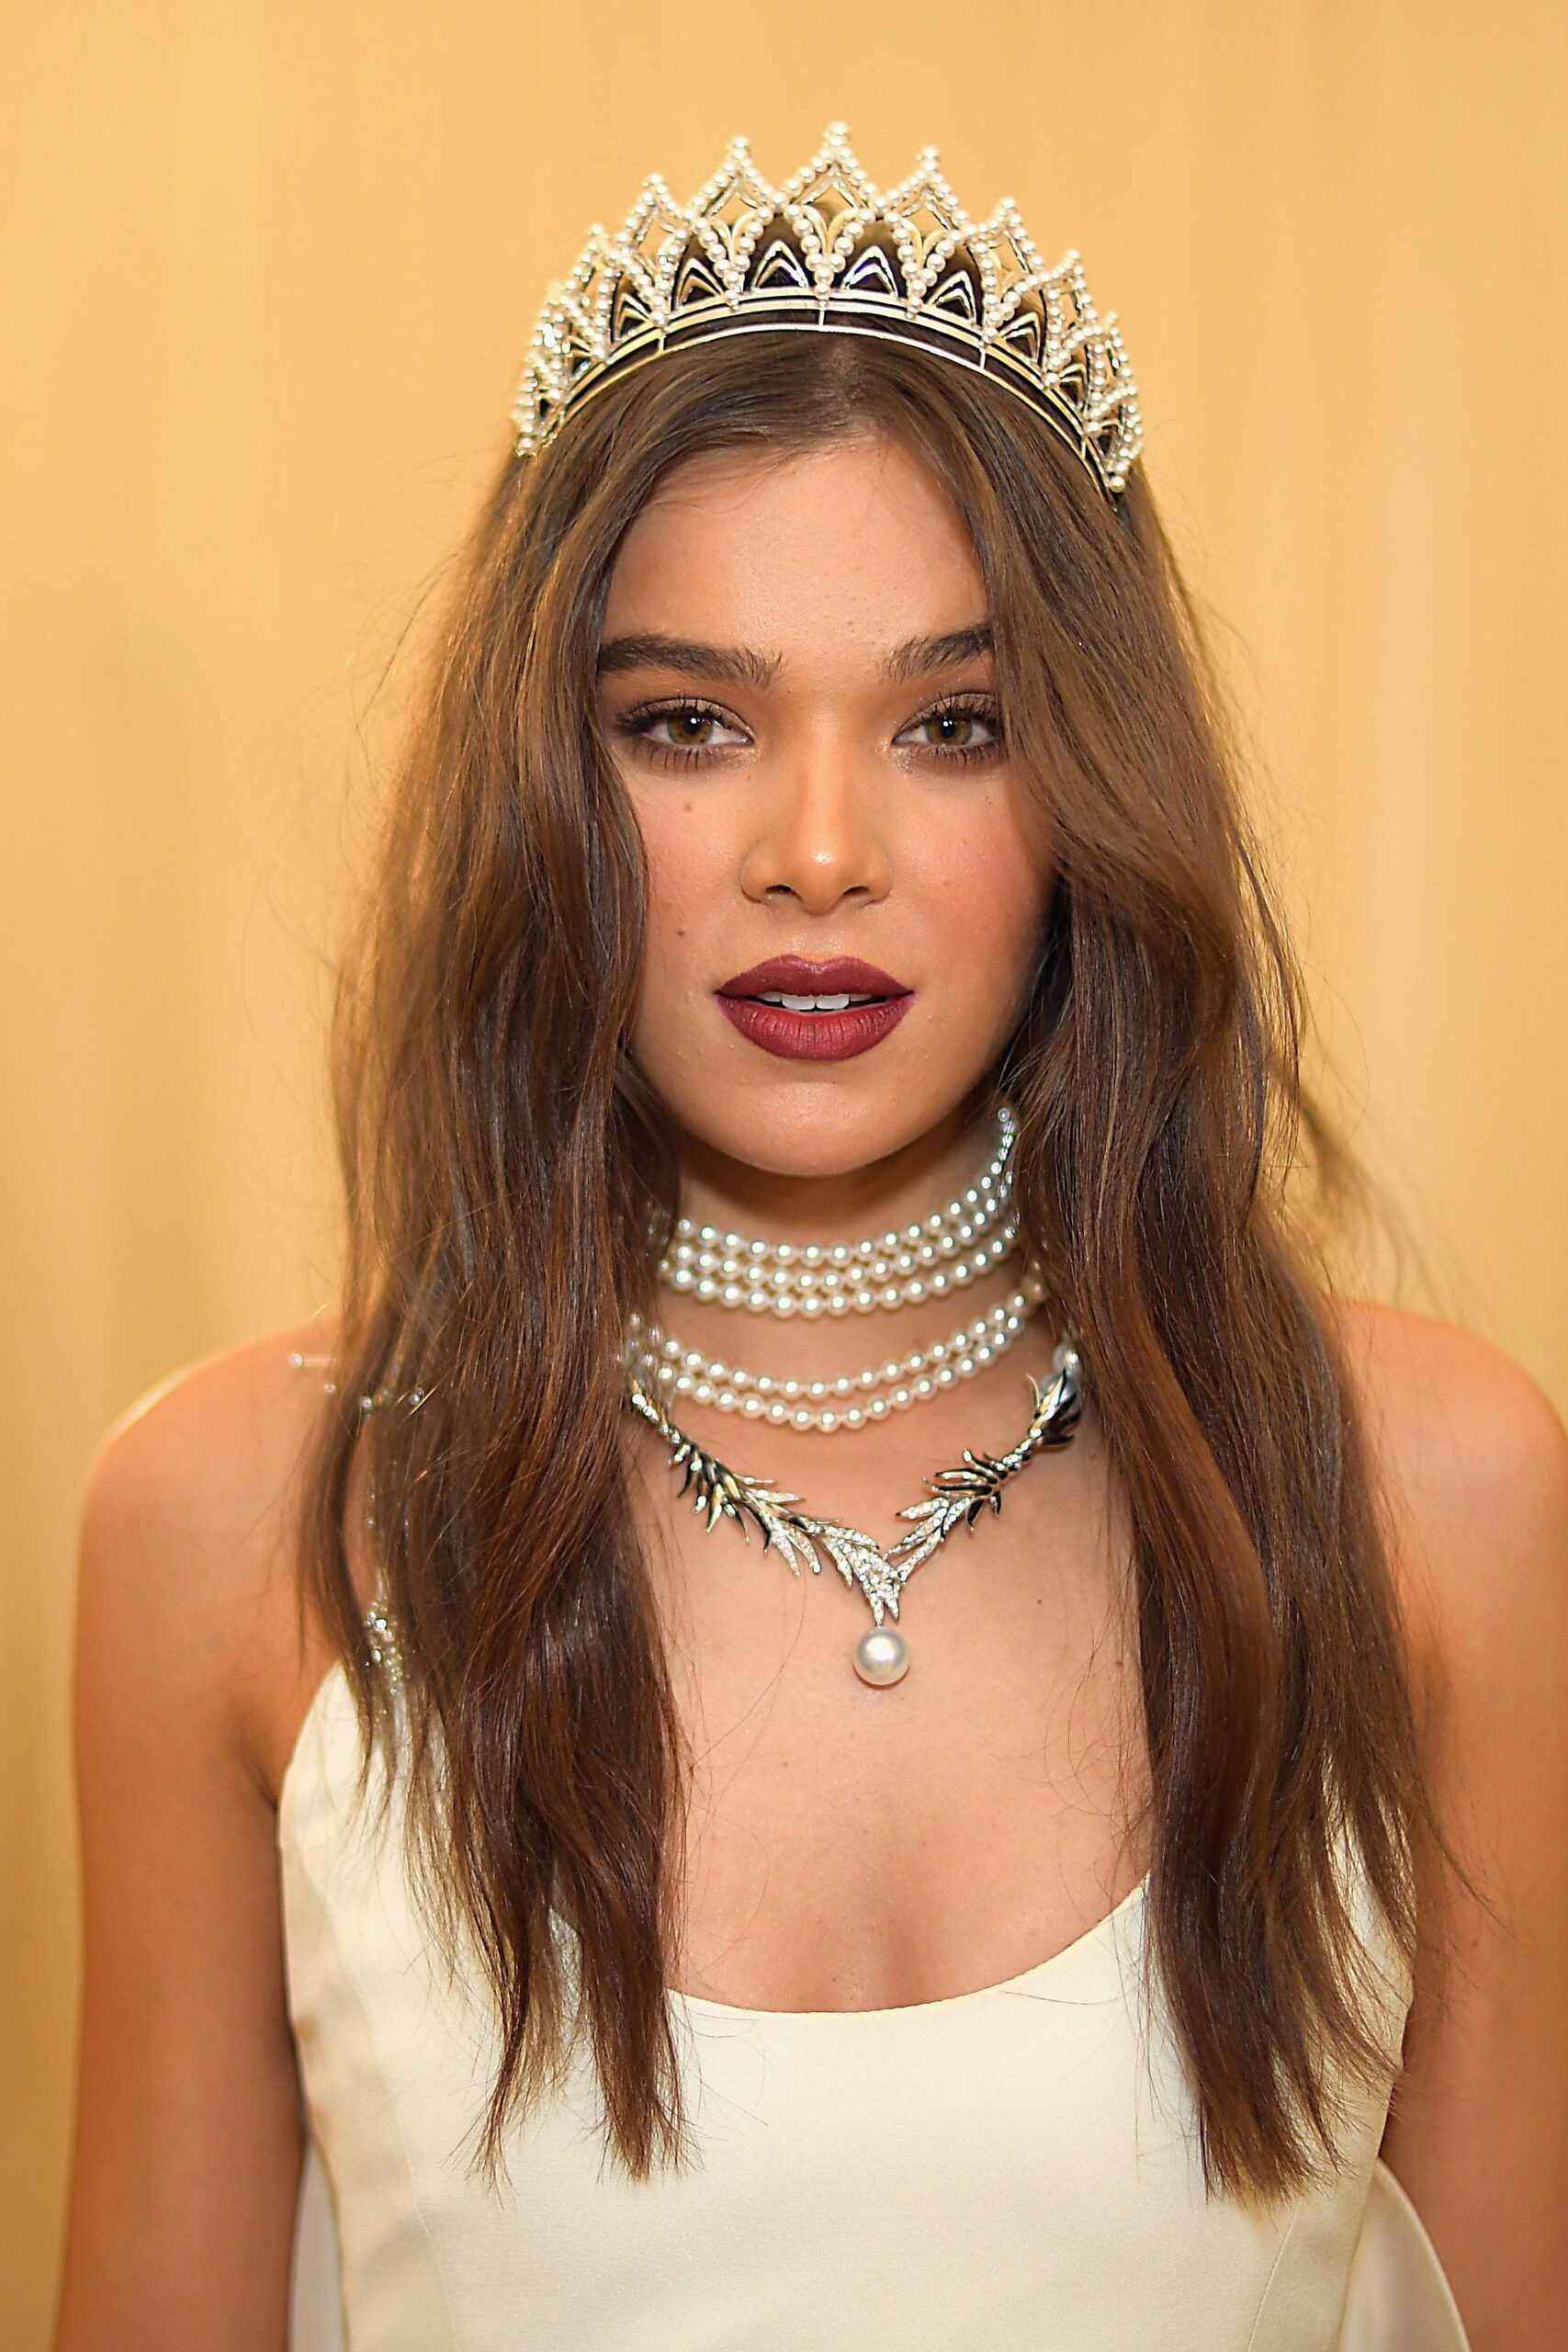 Hailee Steinfeld needs a cock between those lips